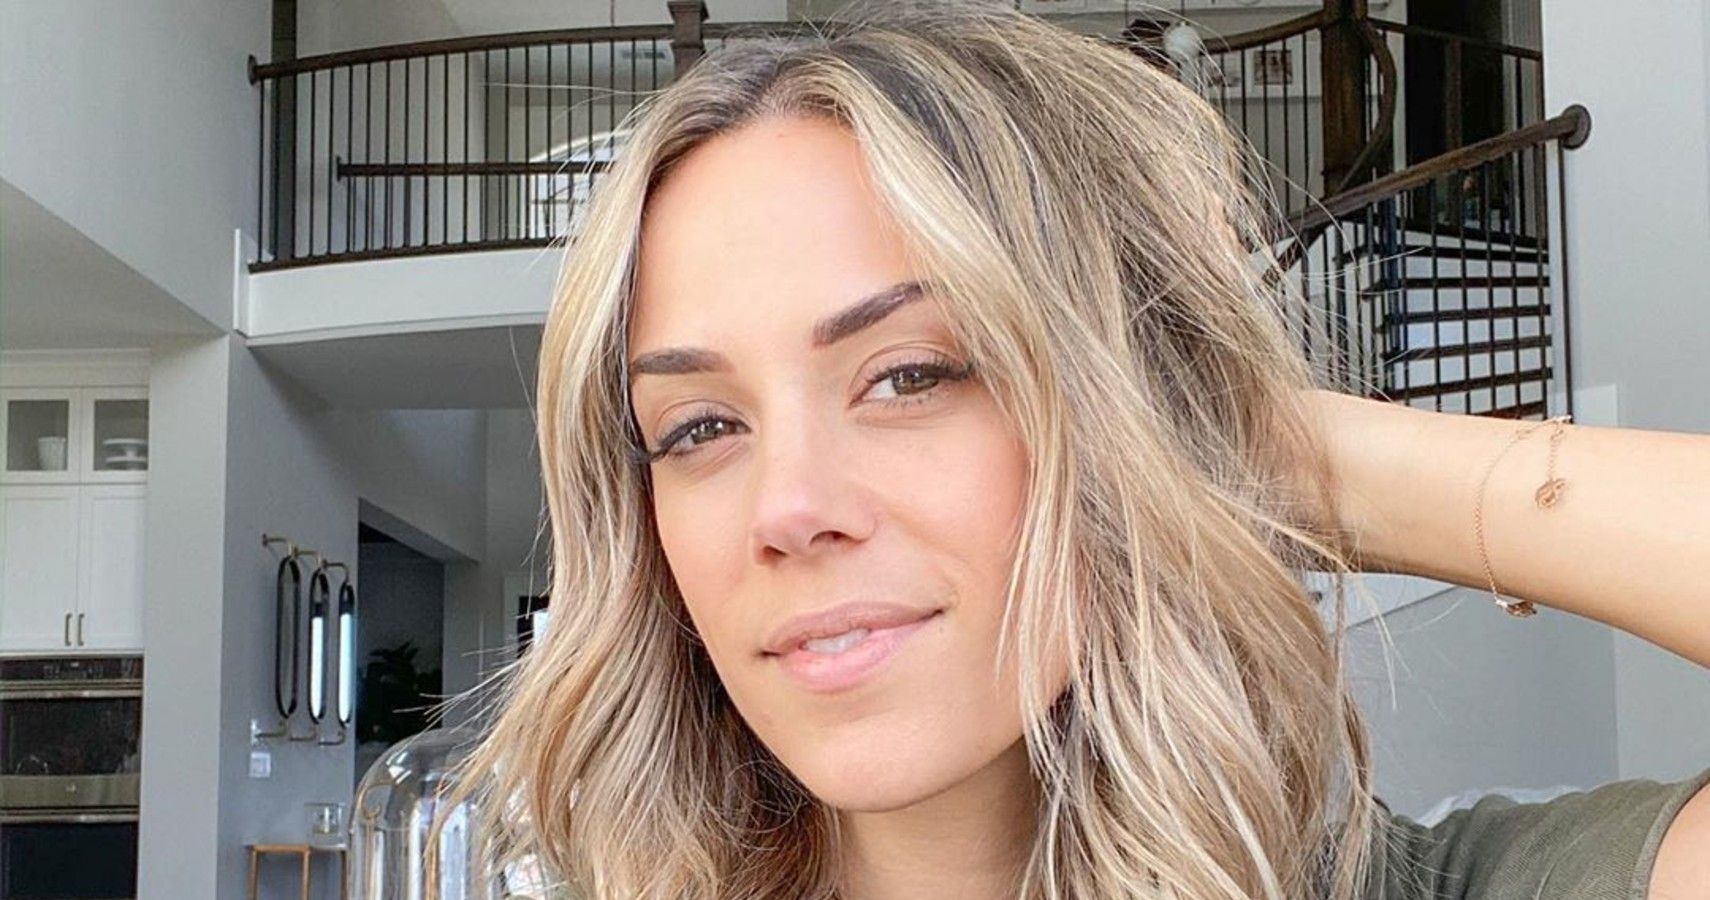 Jana Kramer Reveals Her Top Baby Name If She Has Another Girl